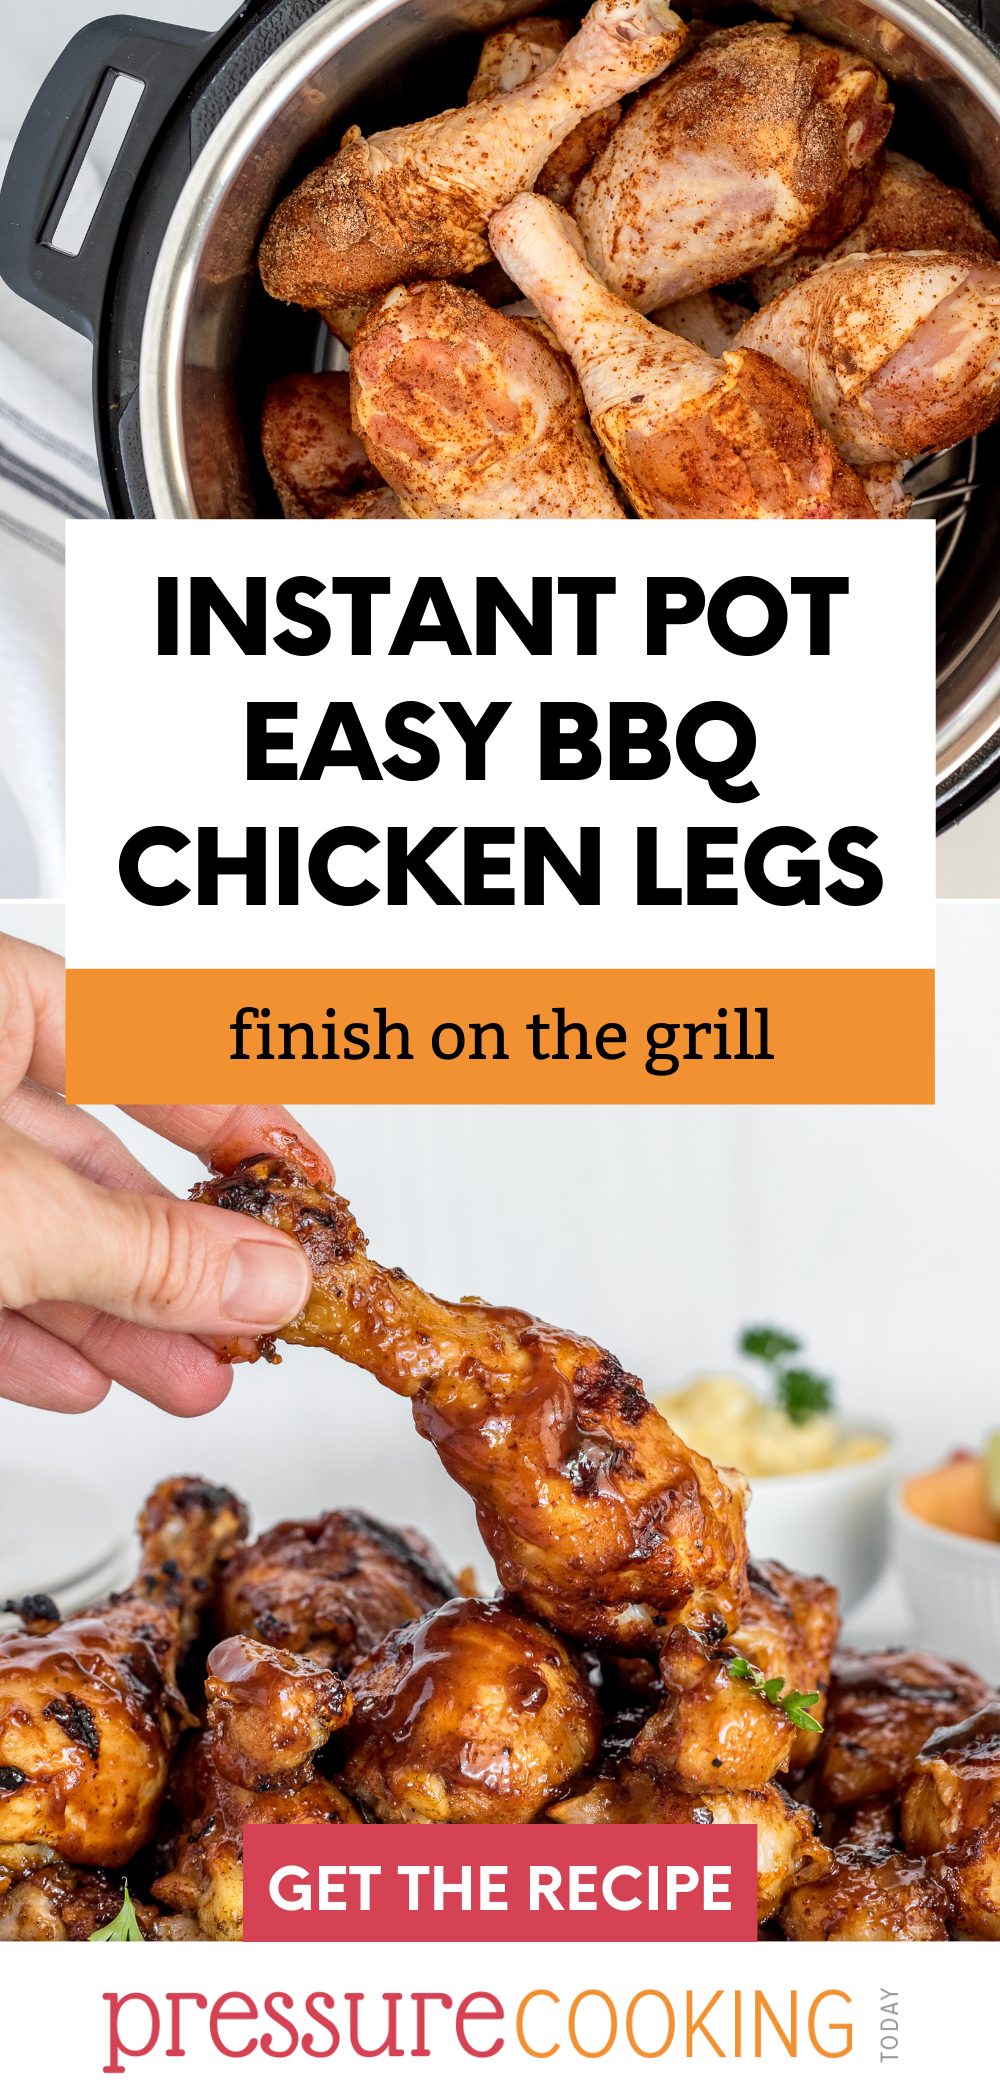 A pinterest image that reads "Instant Pot Easy BBQ Chicken Legs: finish on the grill" with two photos. The top photo is uncooked chicken legs inside and INstant Pot. The bottom photo is a close-up of a hand picking up a single leg from a pile of chicken legs. via @PressureCook2da